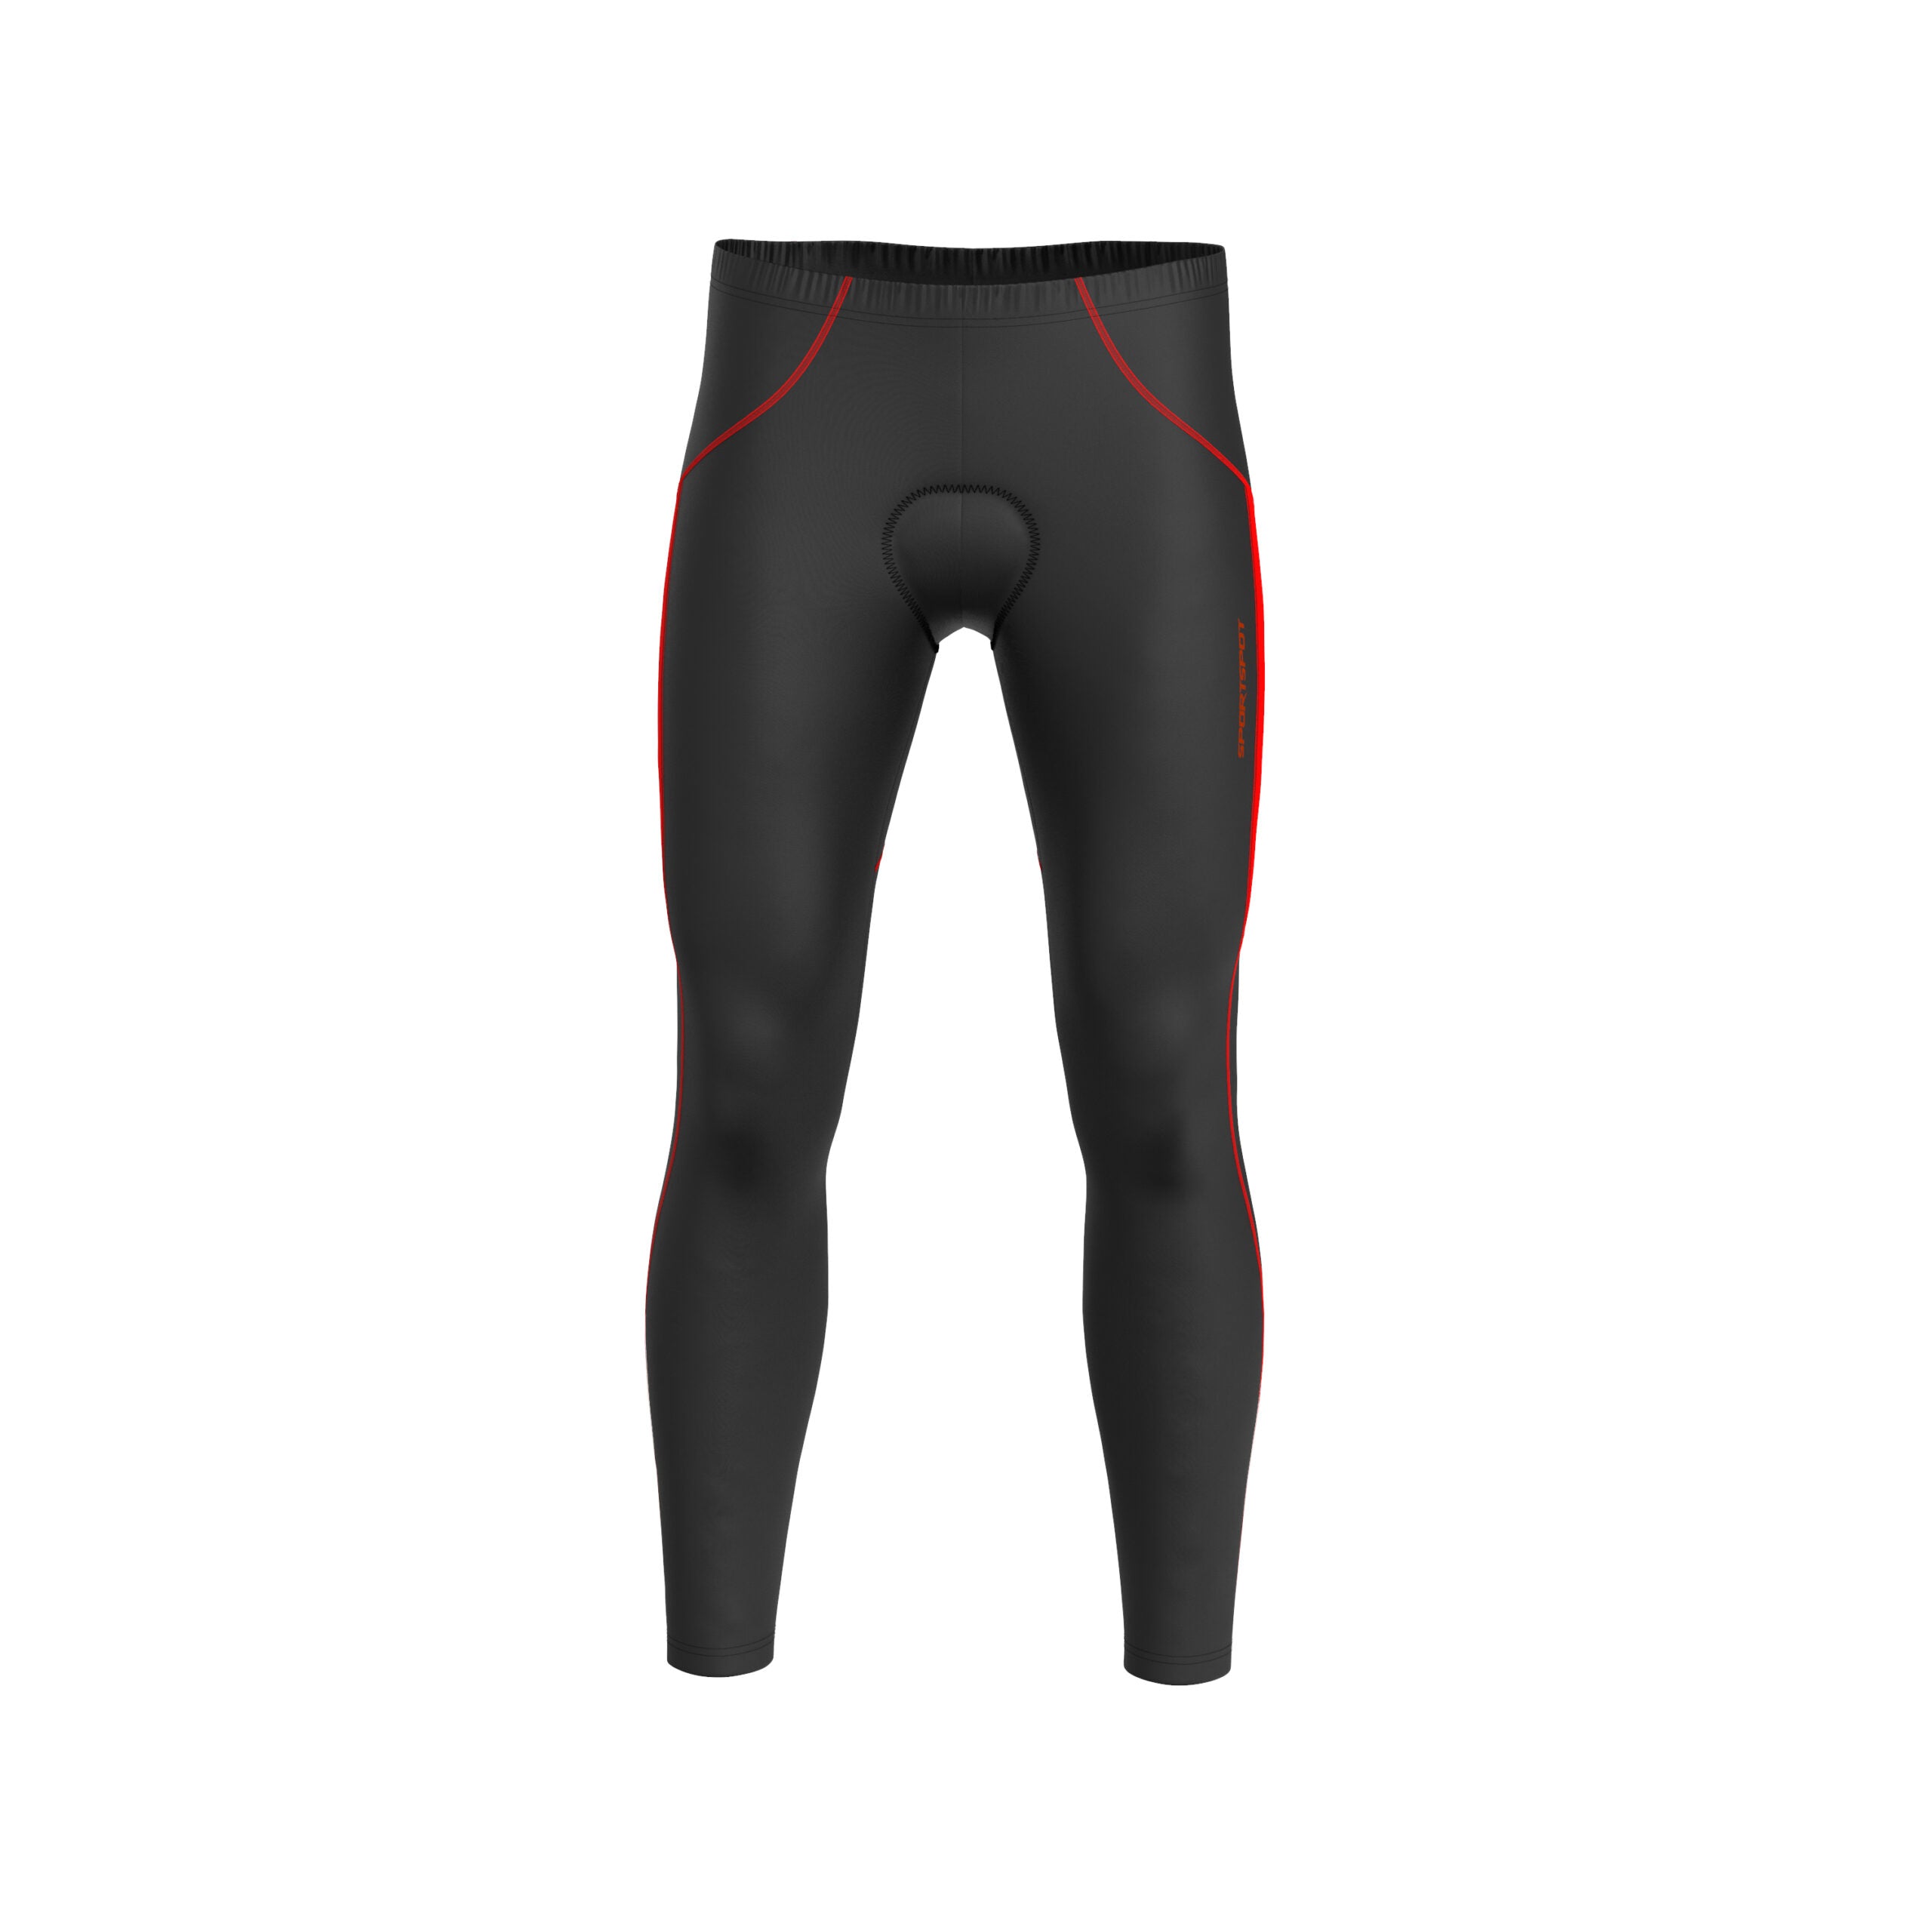 cycling tights with red accents